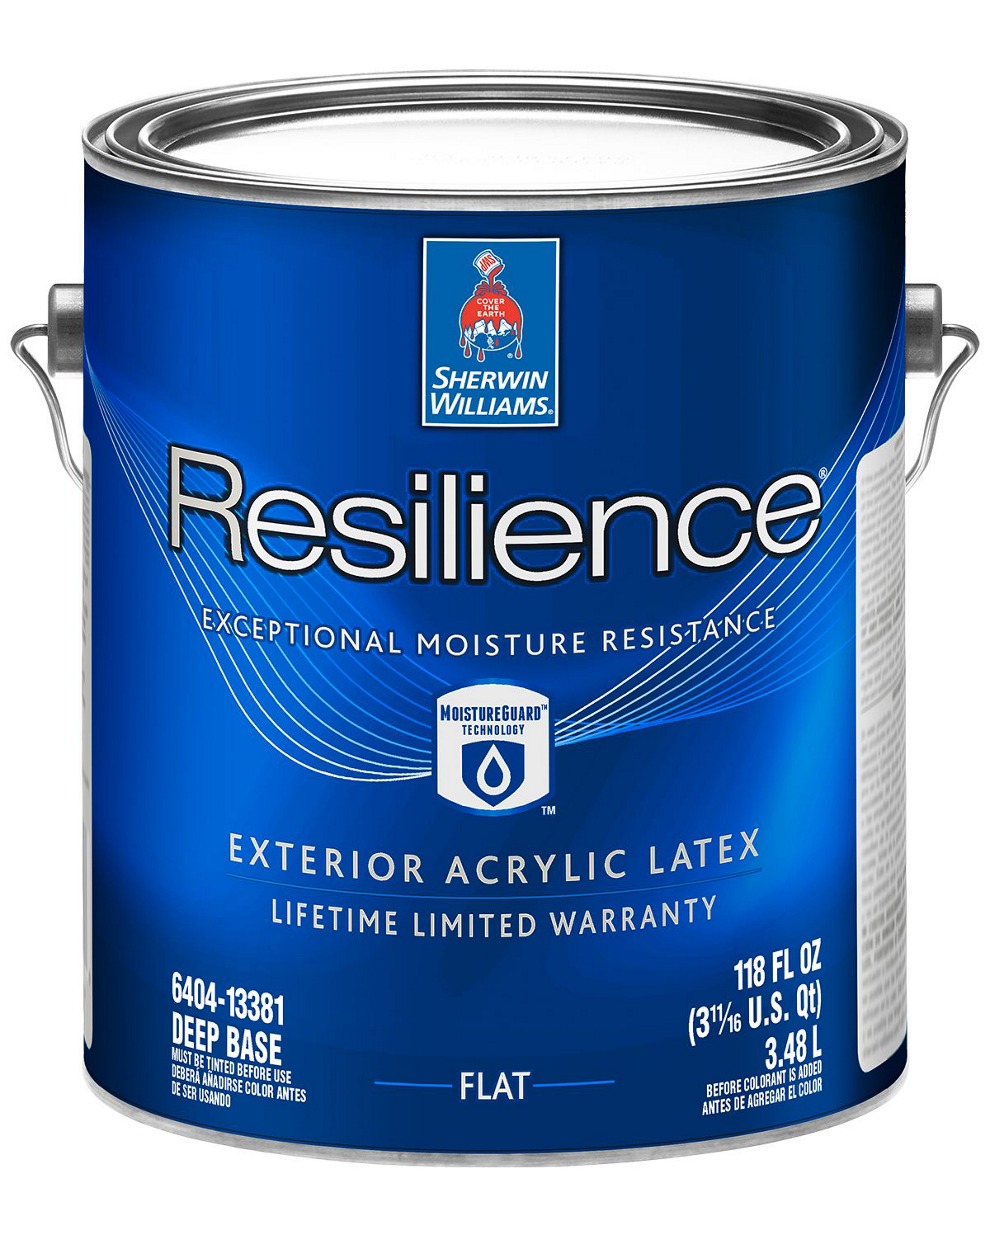 Sherwin Williams Resilience Paint professionally applied by Meticulous Painting - Fall River, MA